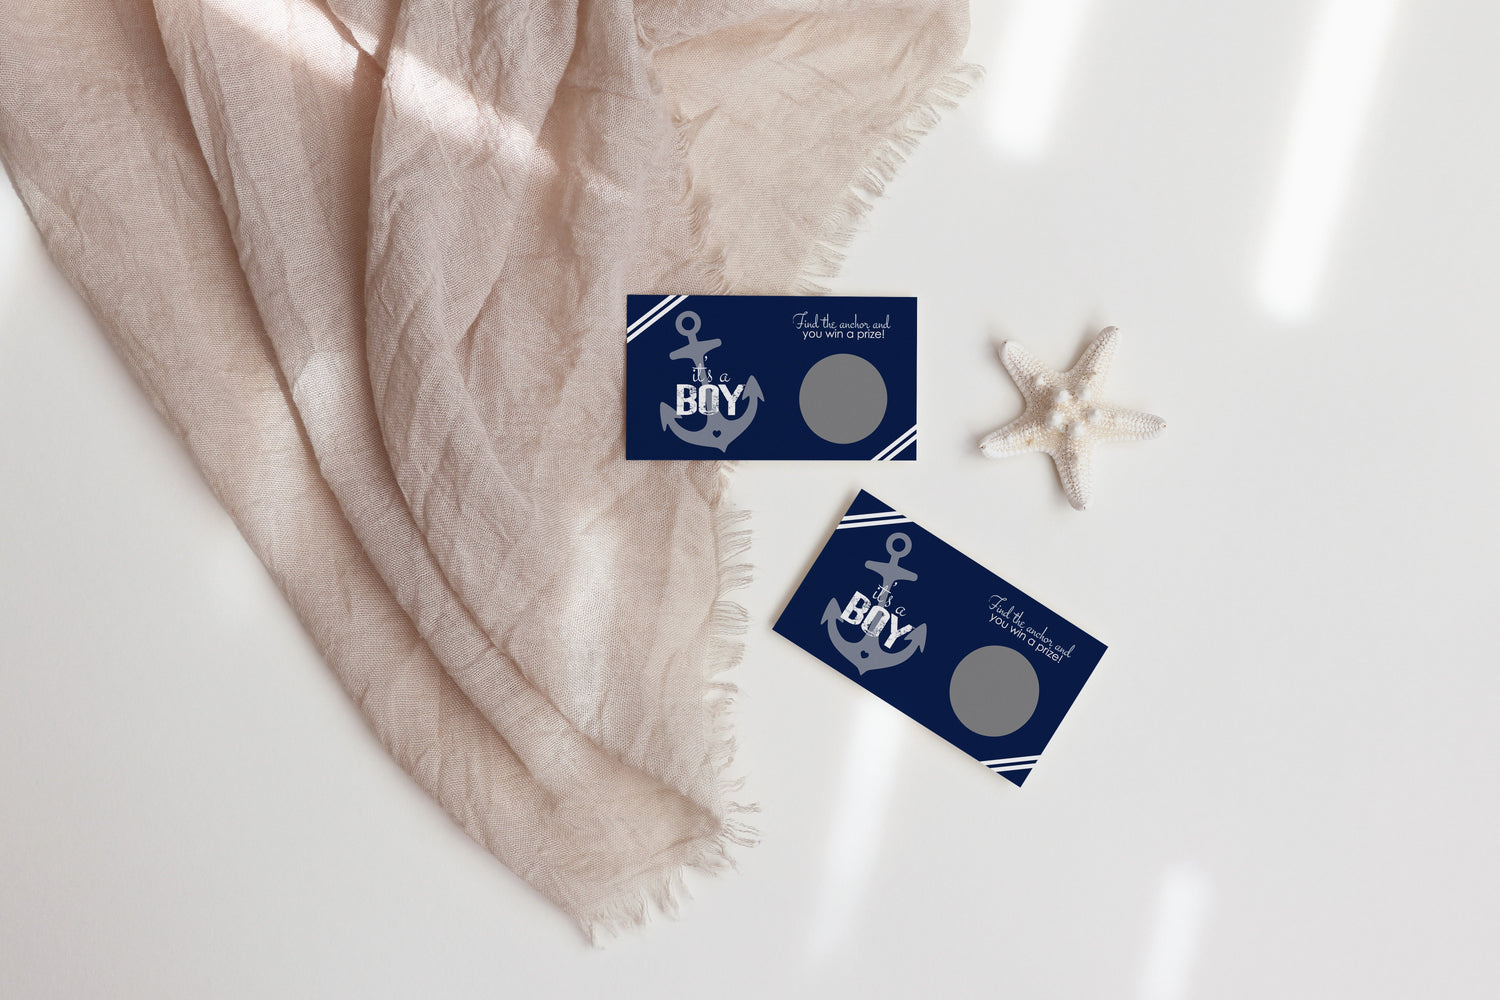 Set sail for celebration with our ‘Ahoy Baby Boy’ nautical baby shower theme. Dive into our treasure trove of navy blue and white anchor-themed invitations, thank you cards, and games, crafted for a sea of memories.